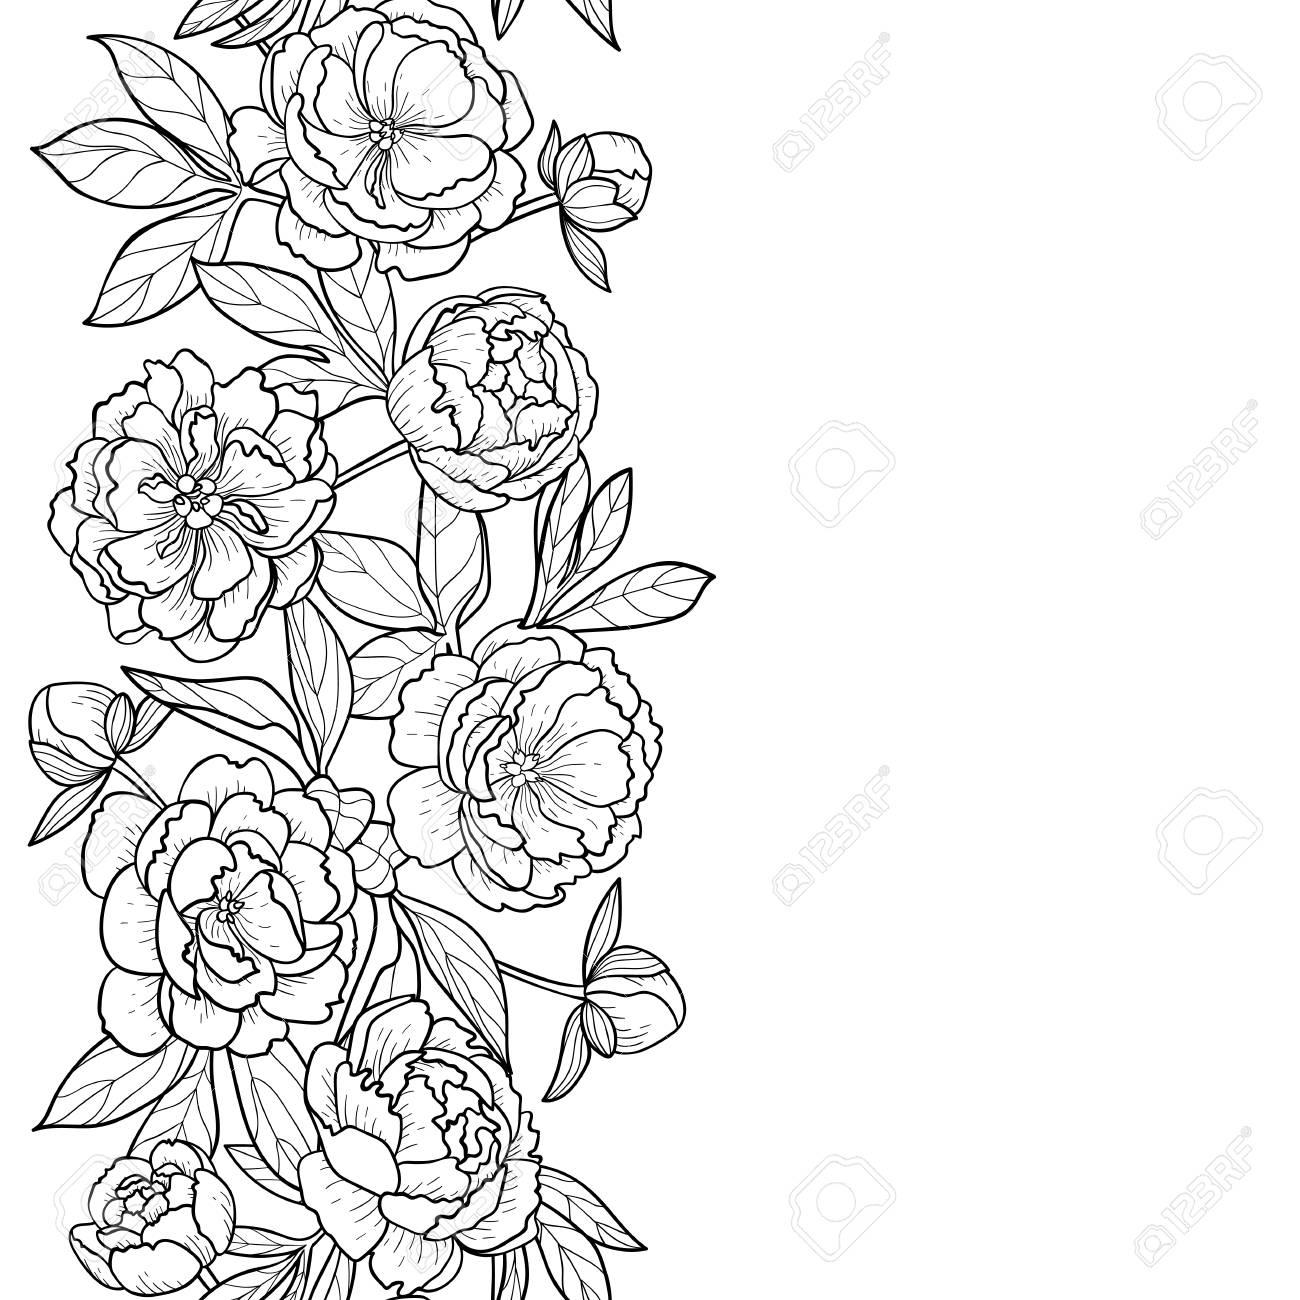 Peony Flowers And Leaves Seamless Vertical Border. Floral